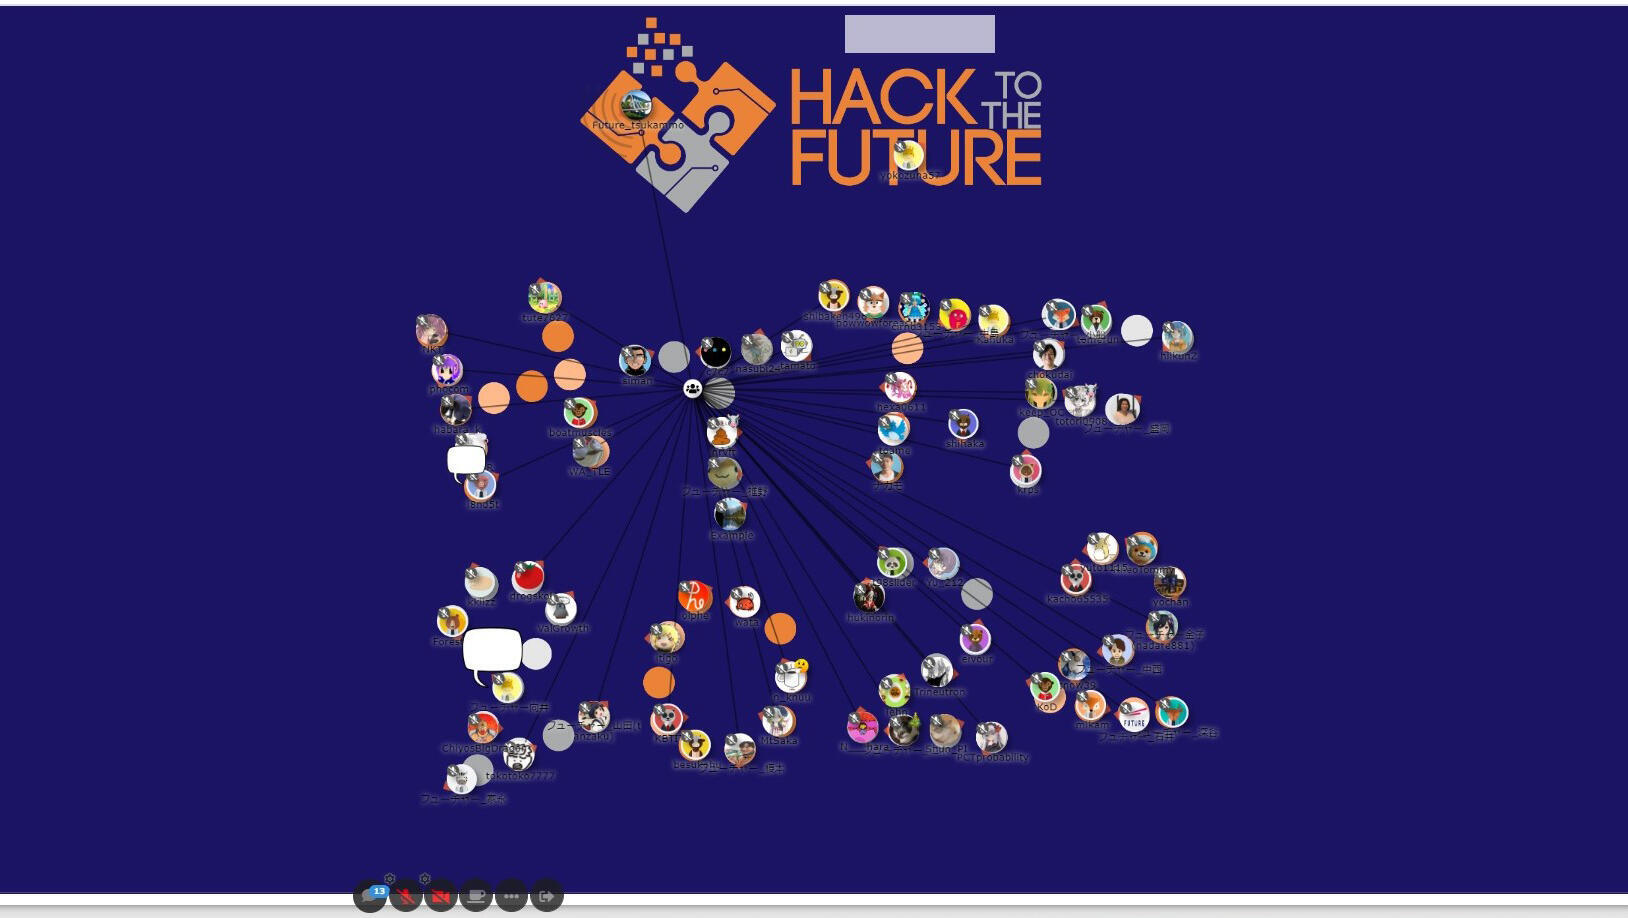 HACK TO THE FUTURE 2022 for Youth